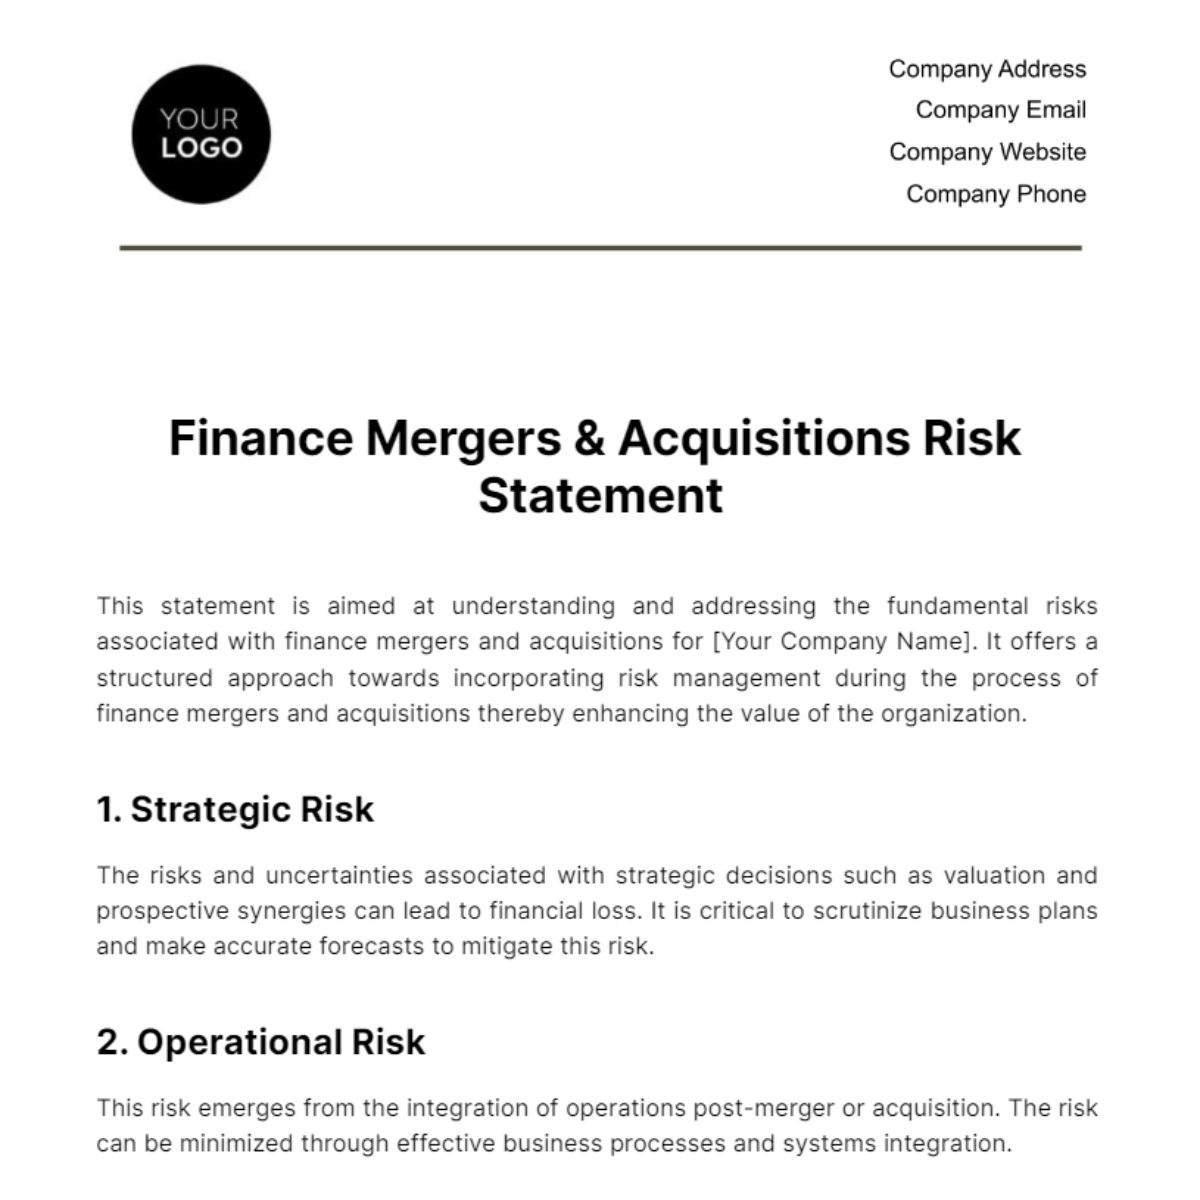 Finance Mergers & Acquisitions Risk Statement Template